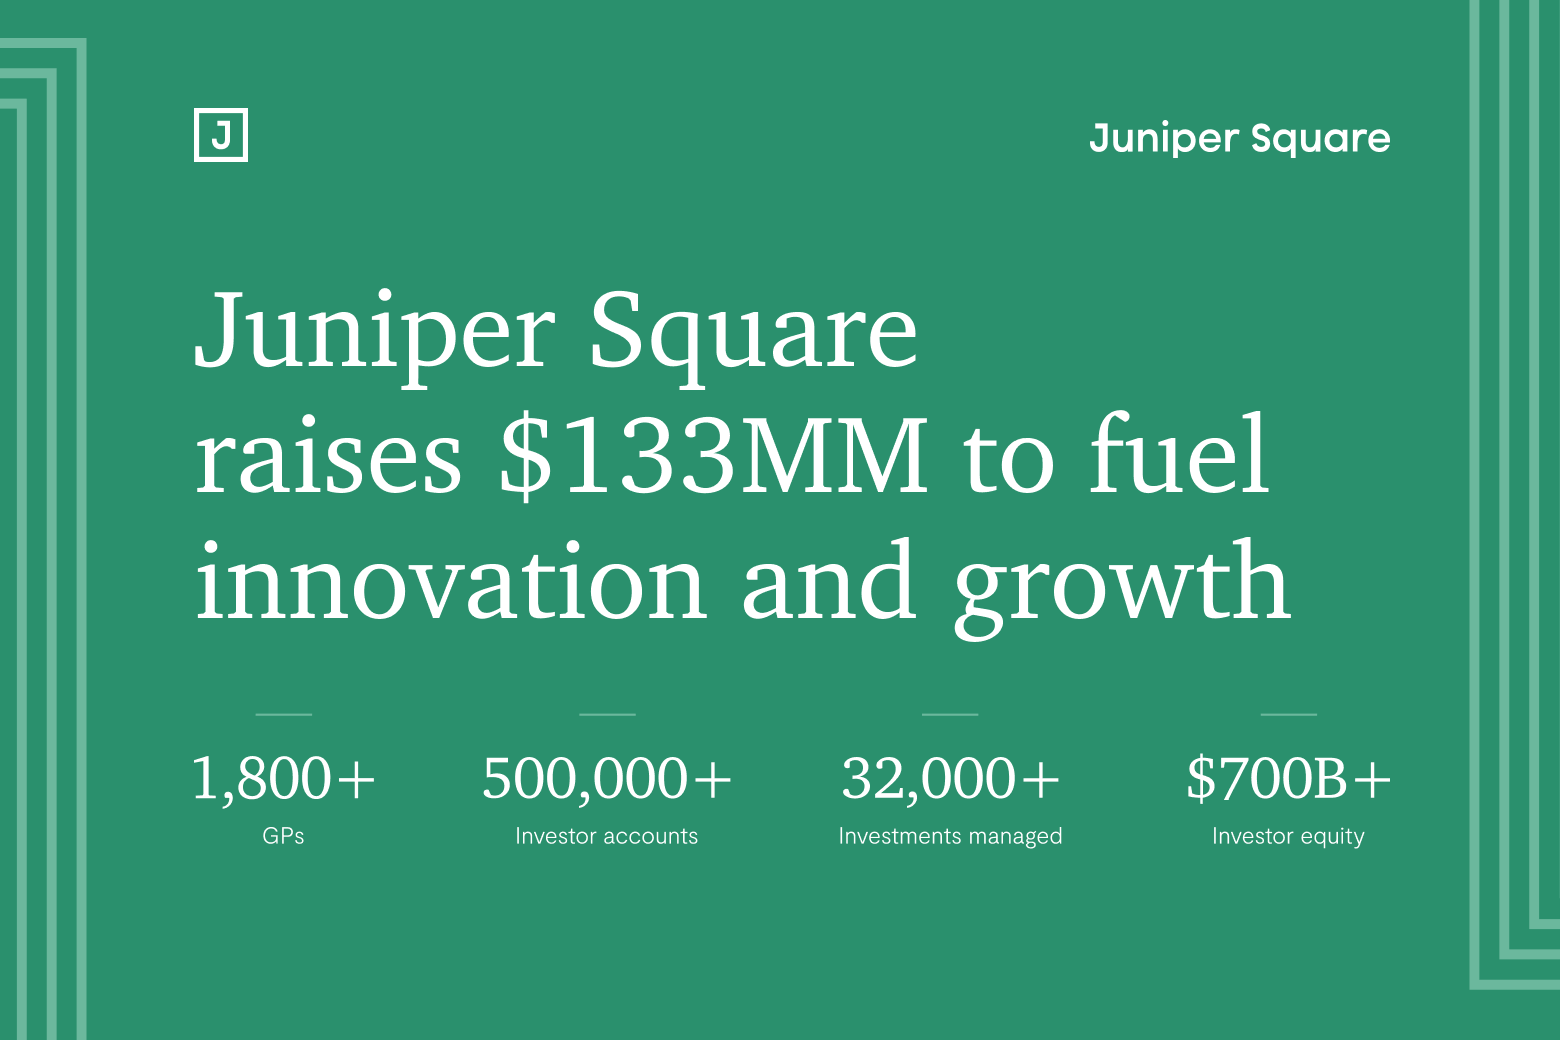 Juniper Square Completes $133MM Fundraise to Fuel Innovation and Growth in Private Markets thumbnail